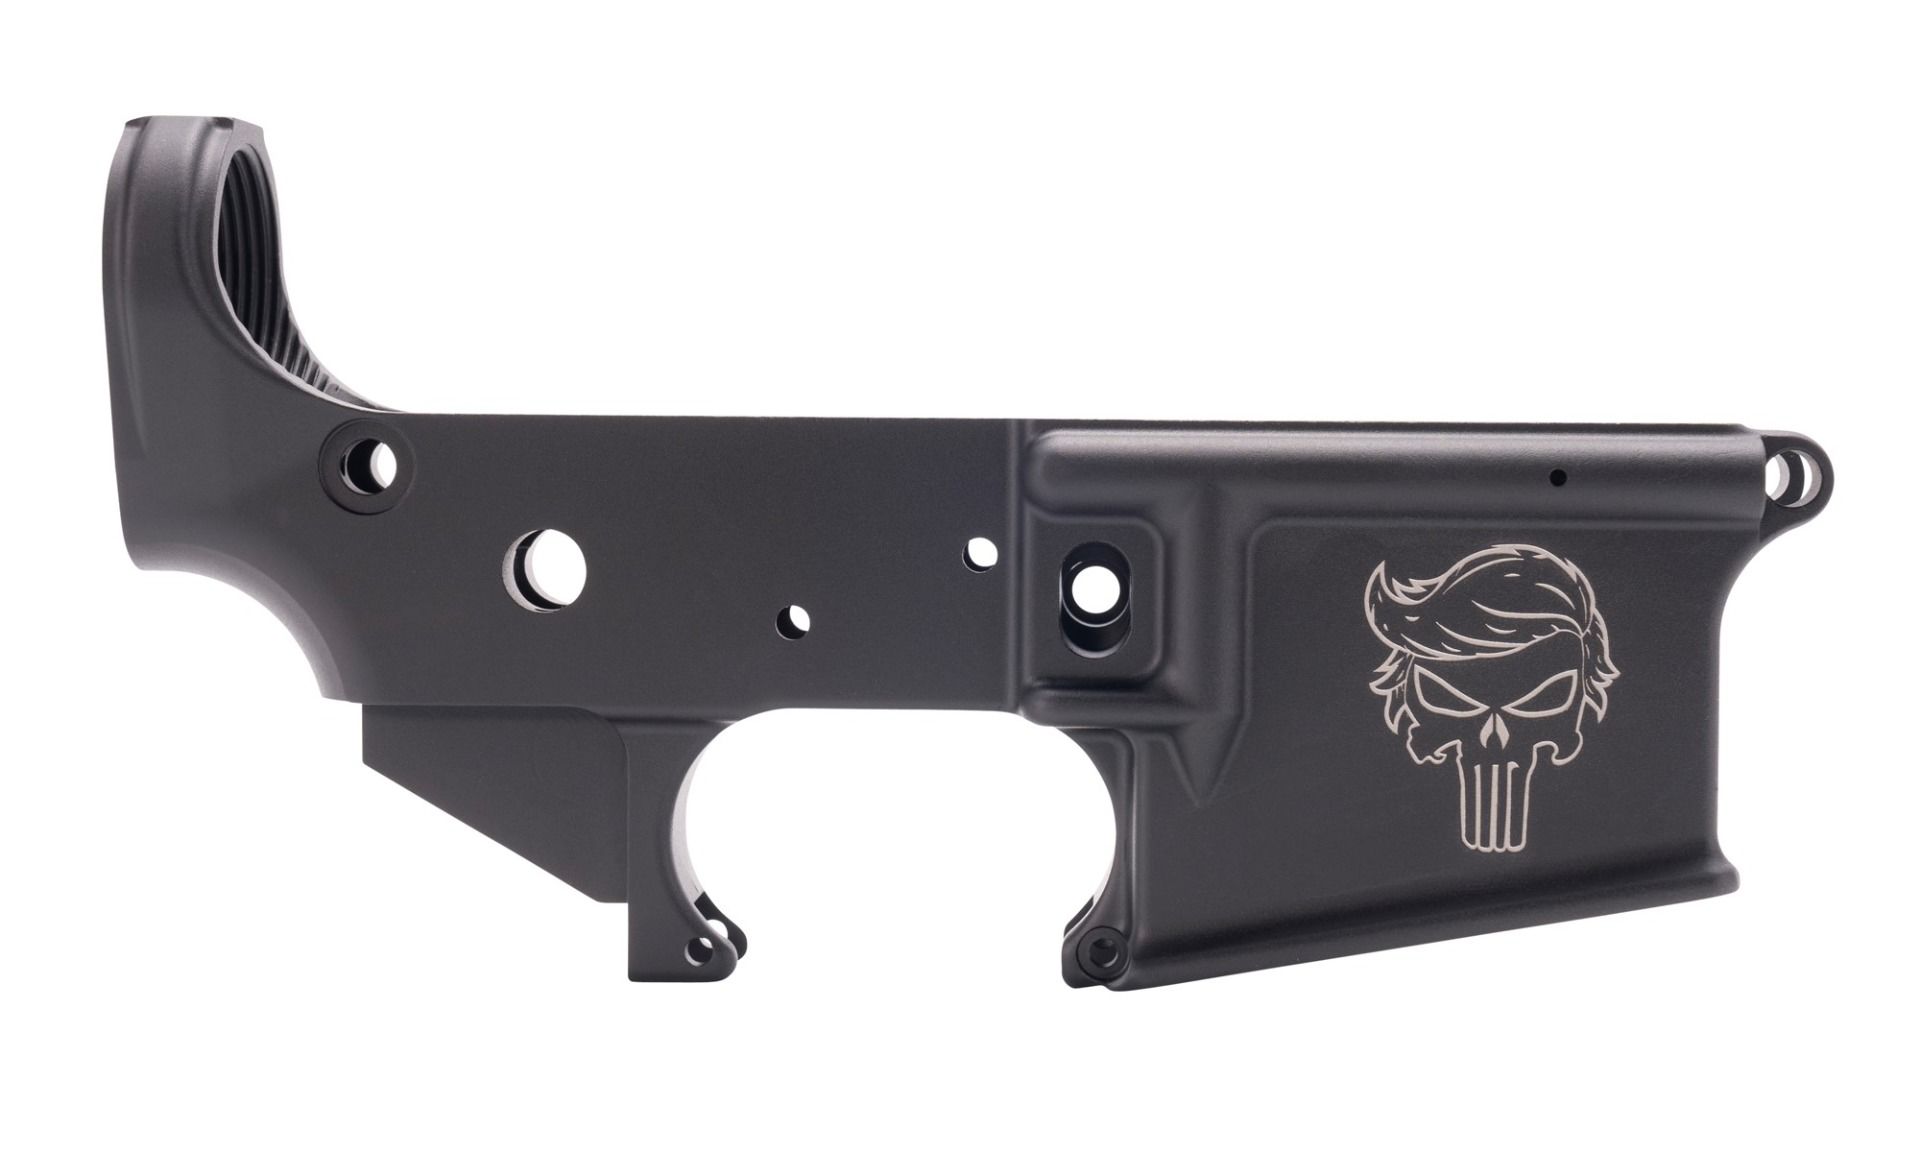 AM LOWER RECEIVER AR15 TRUMP PUNISHER ENG - Rifles & Lower Receivers